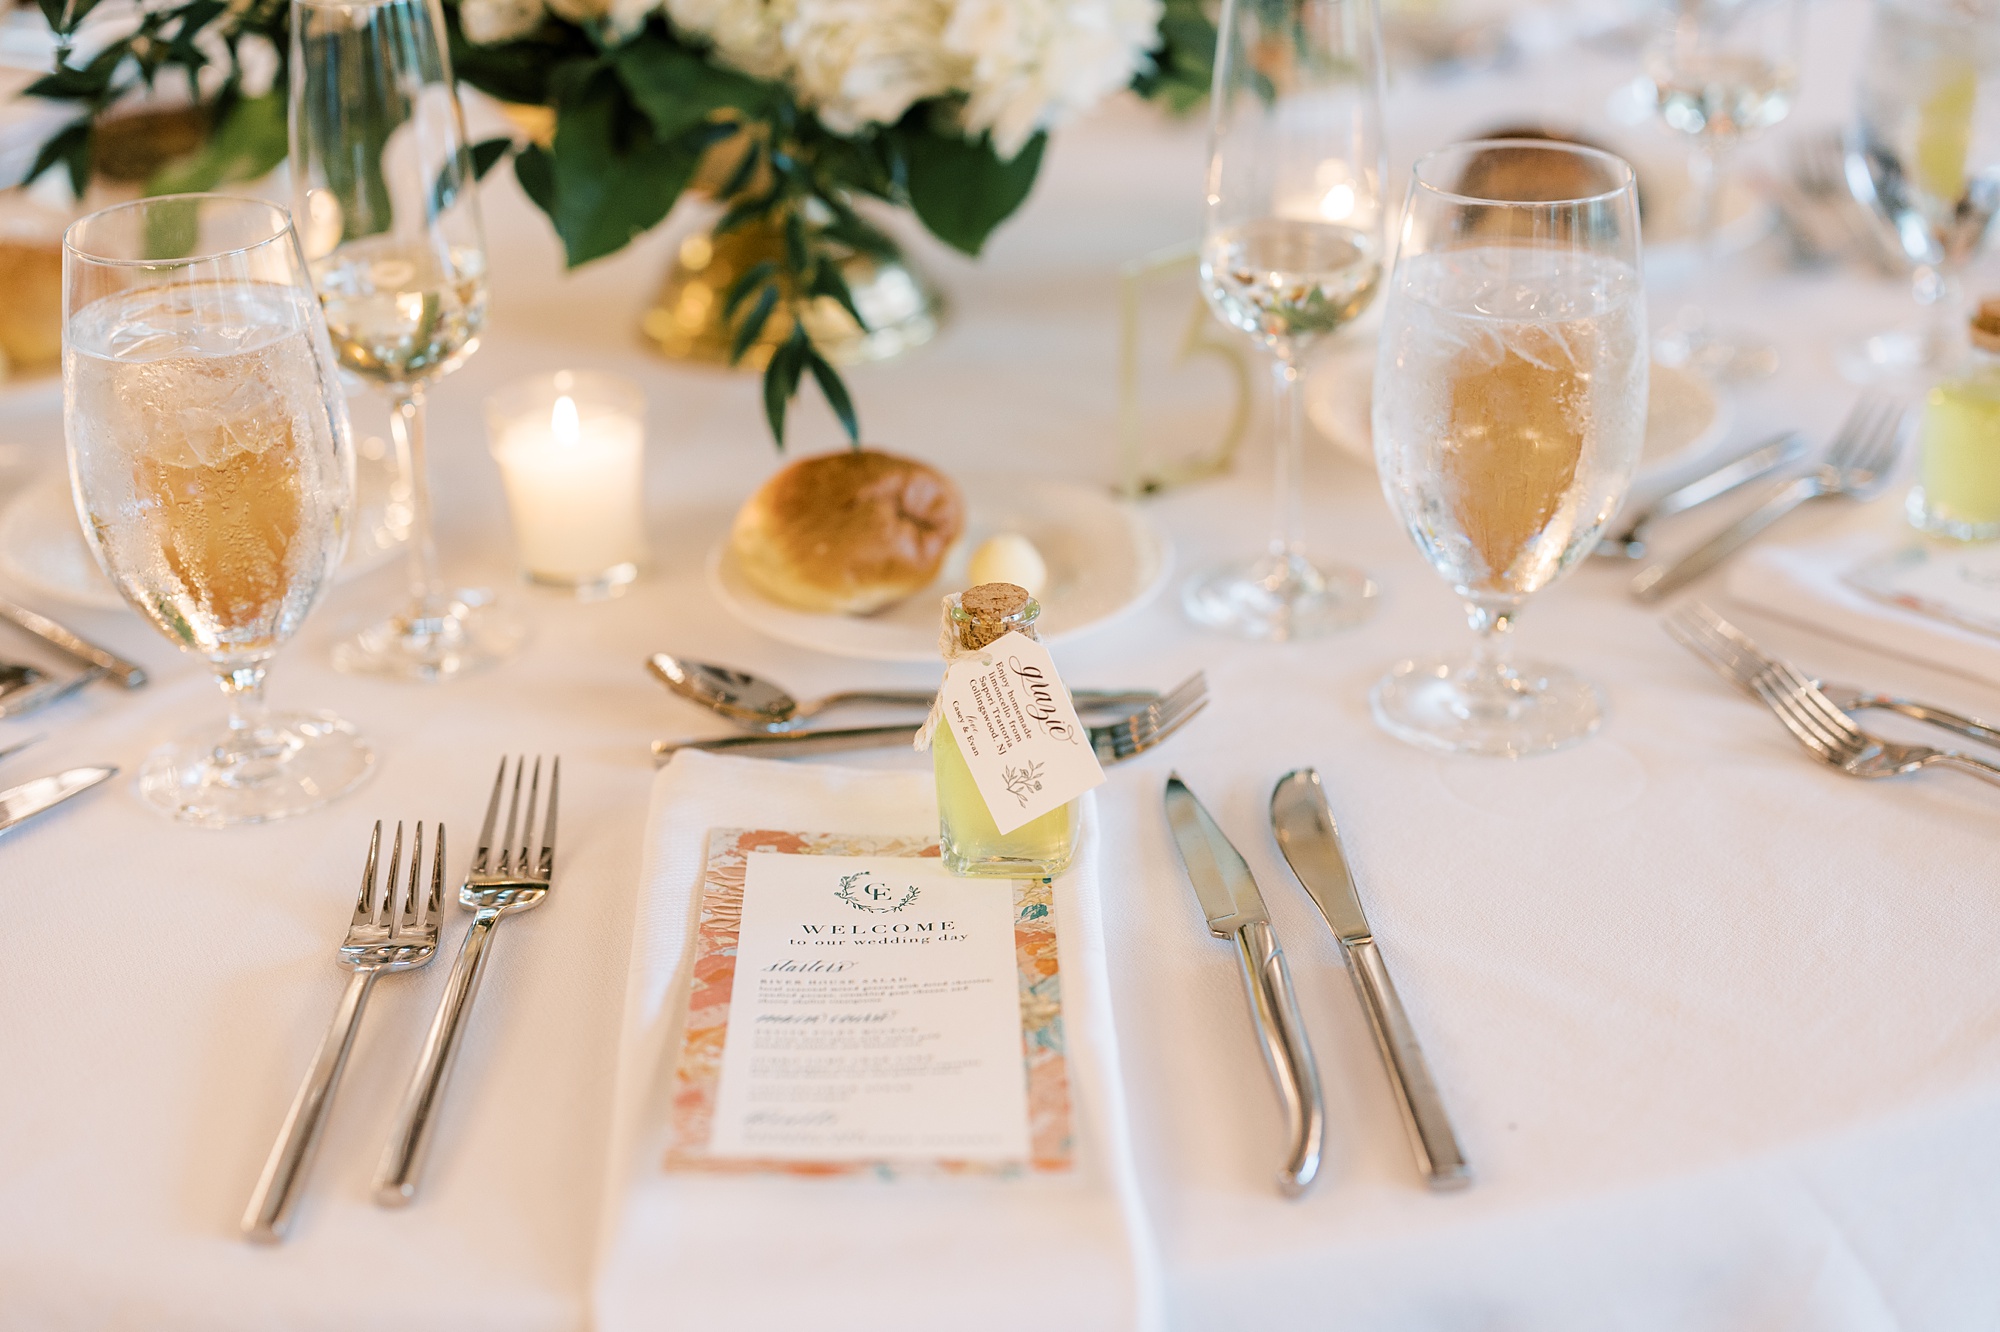 Italian inspired wedding reception at The River House at Odette's